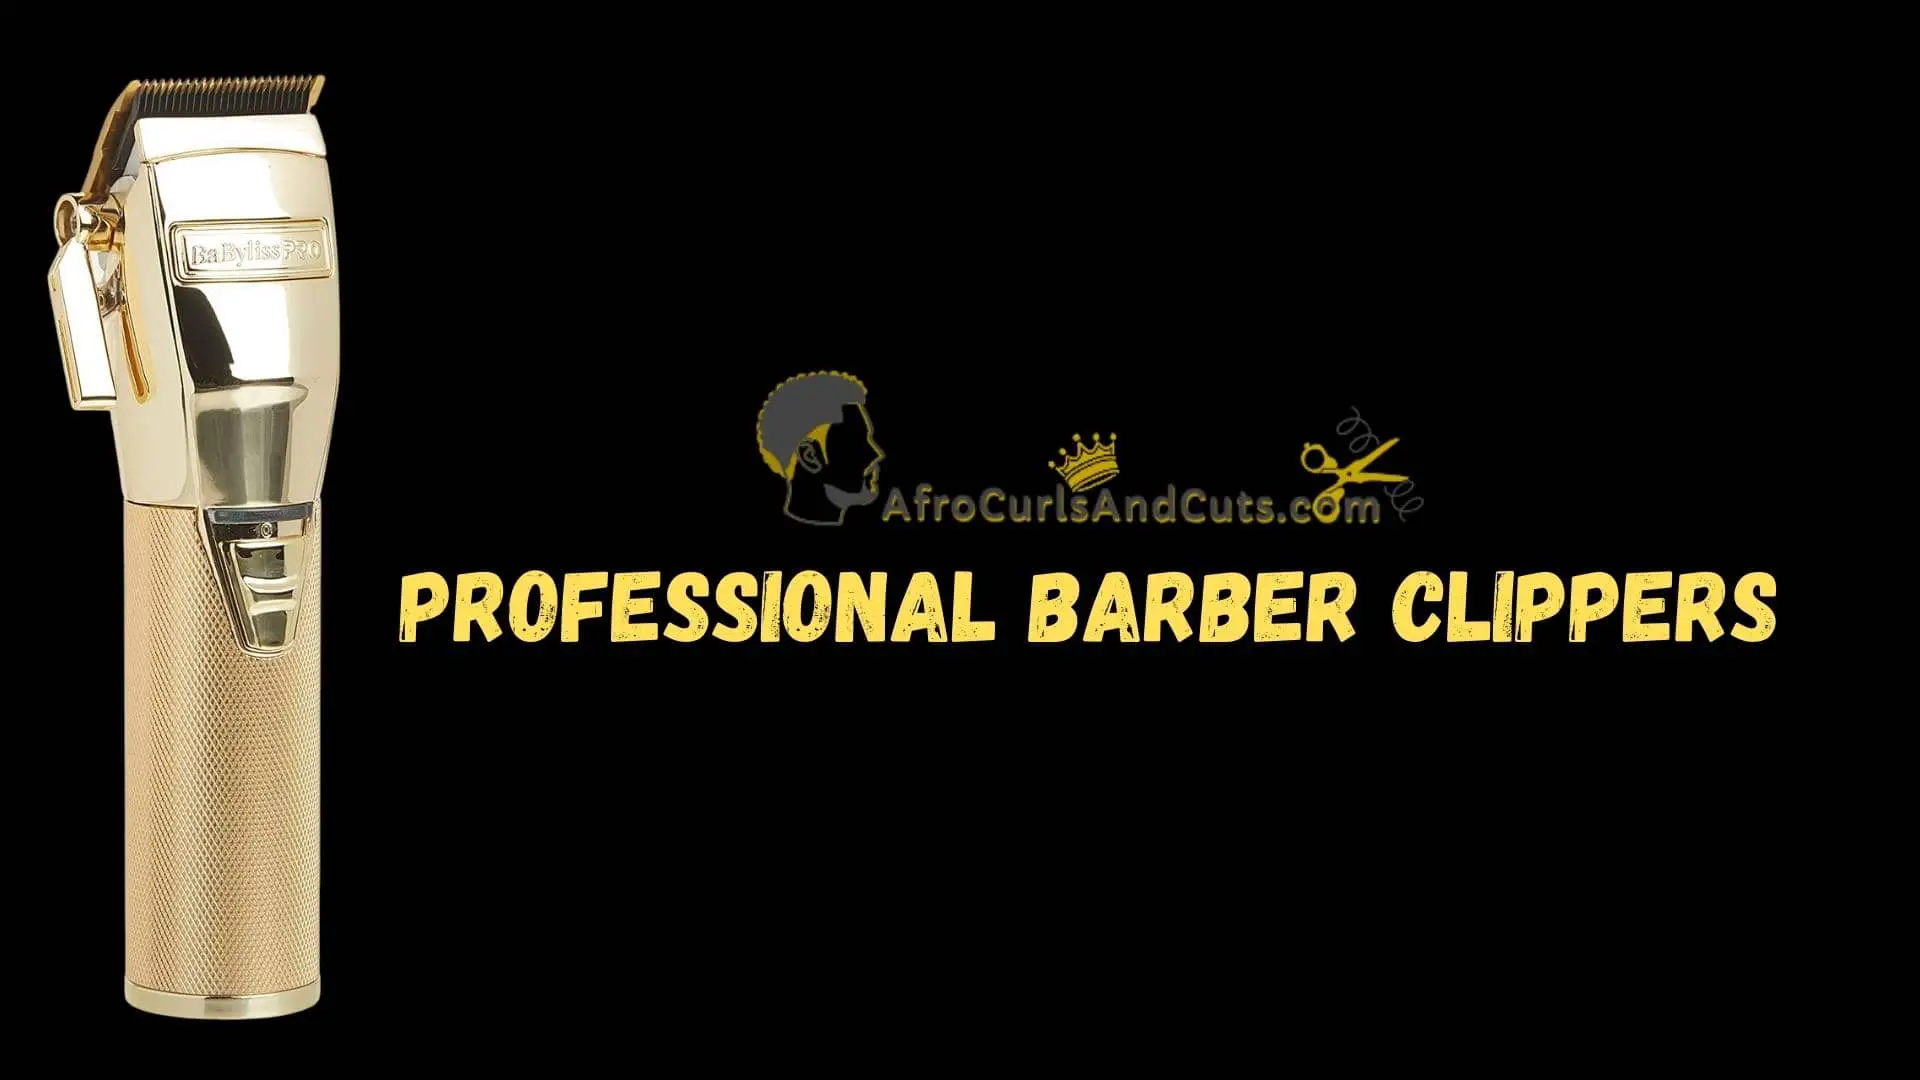 Professional Barber Clippers for DIY Haircuts